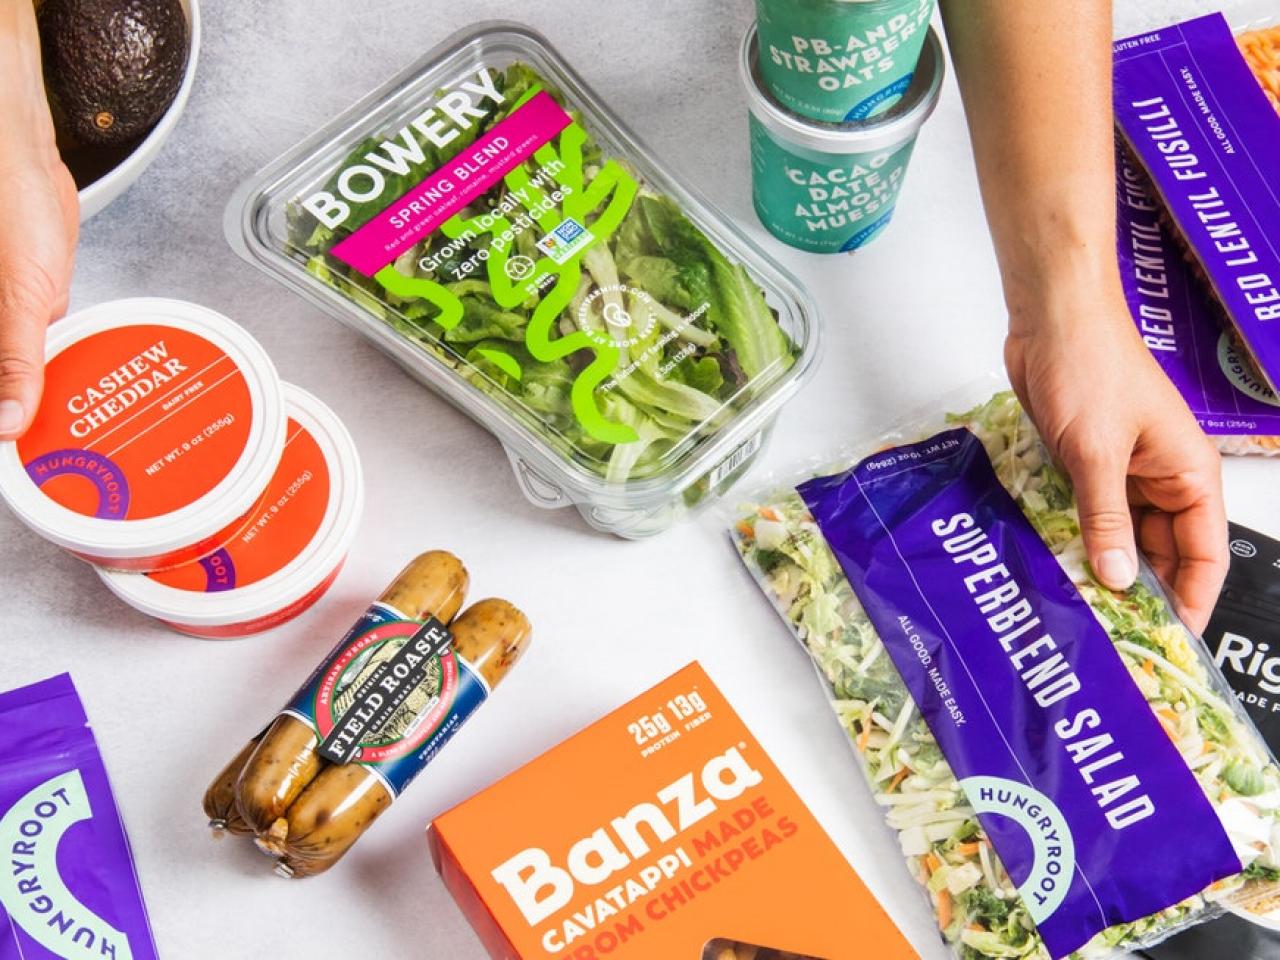 9 Best Vegan Meal Delivery Services, According to a Registered Dietitian